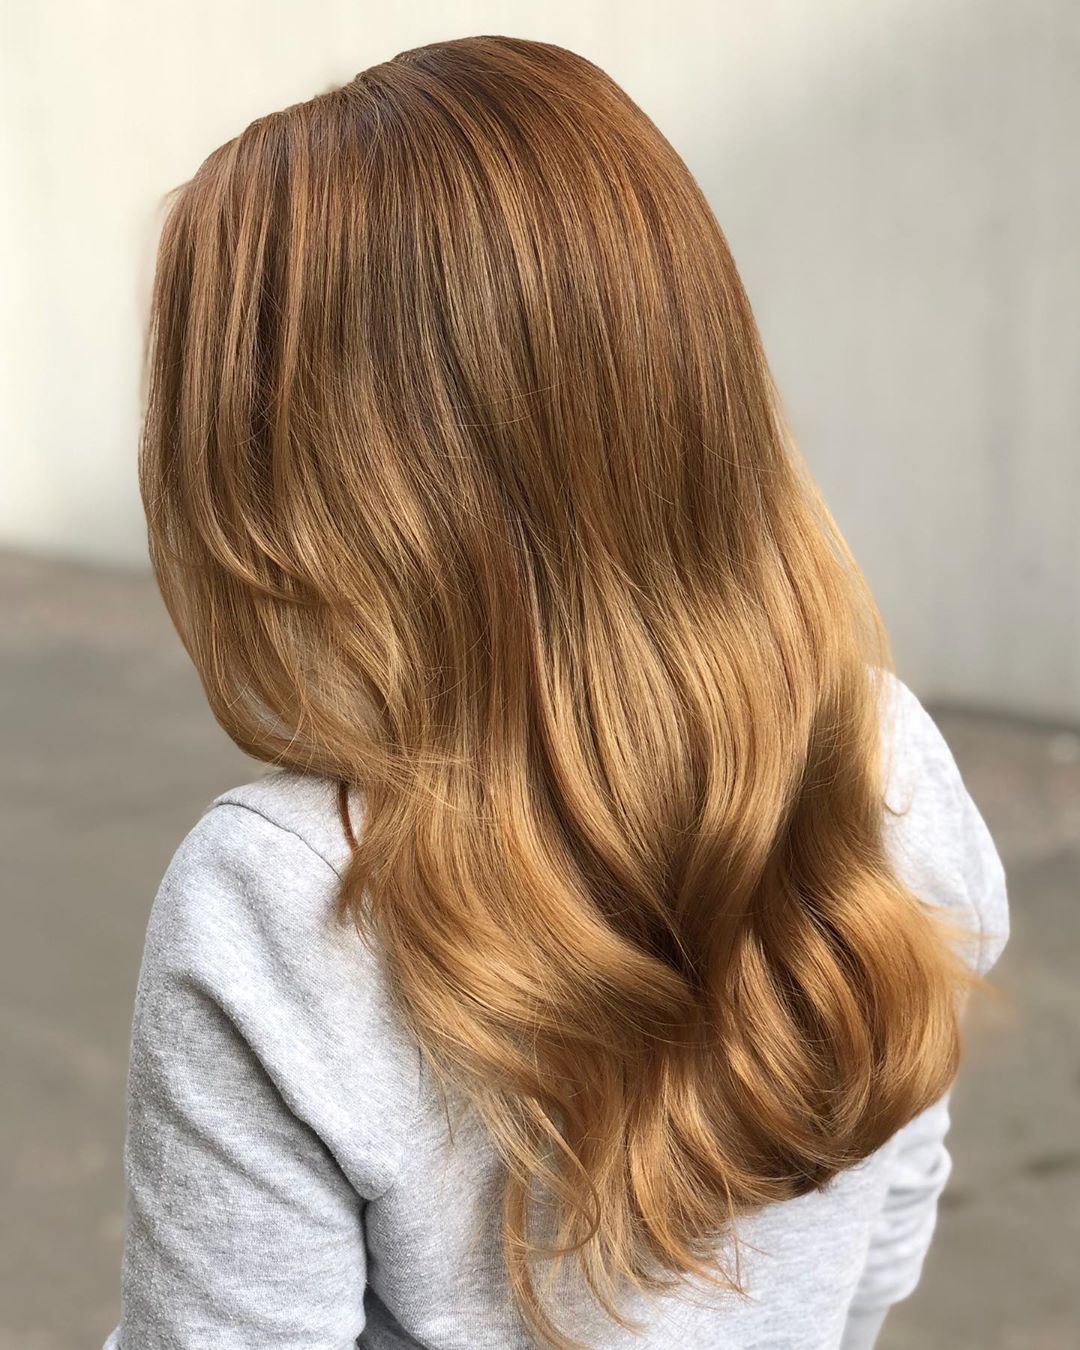 Light Golden Brown Hair Color: How It Looks & 15 Fashion Ideas